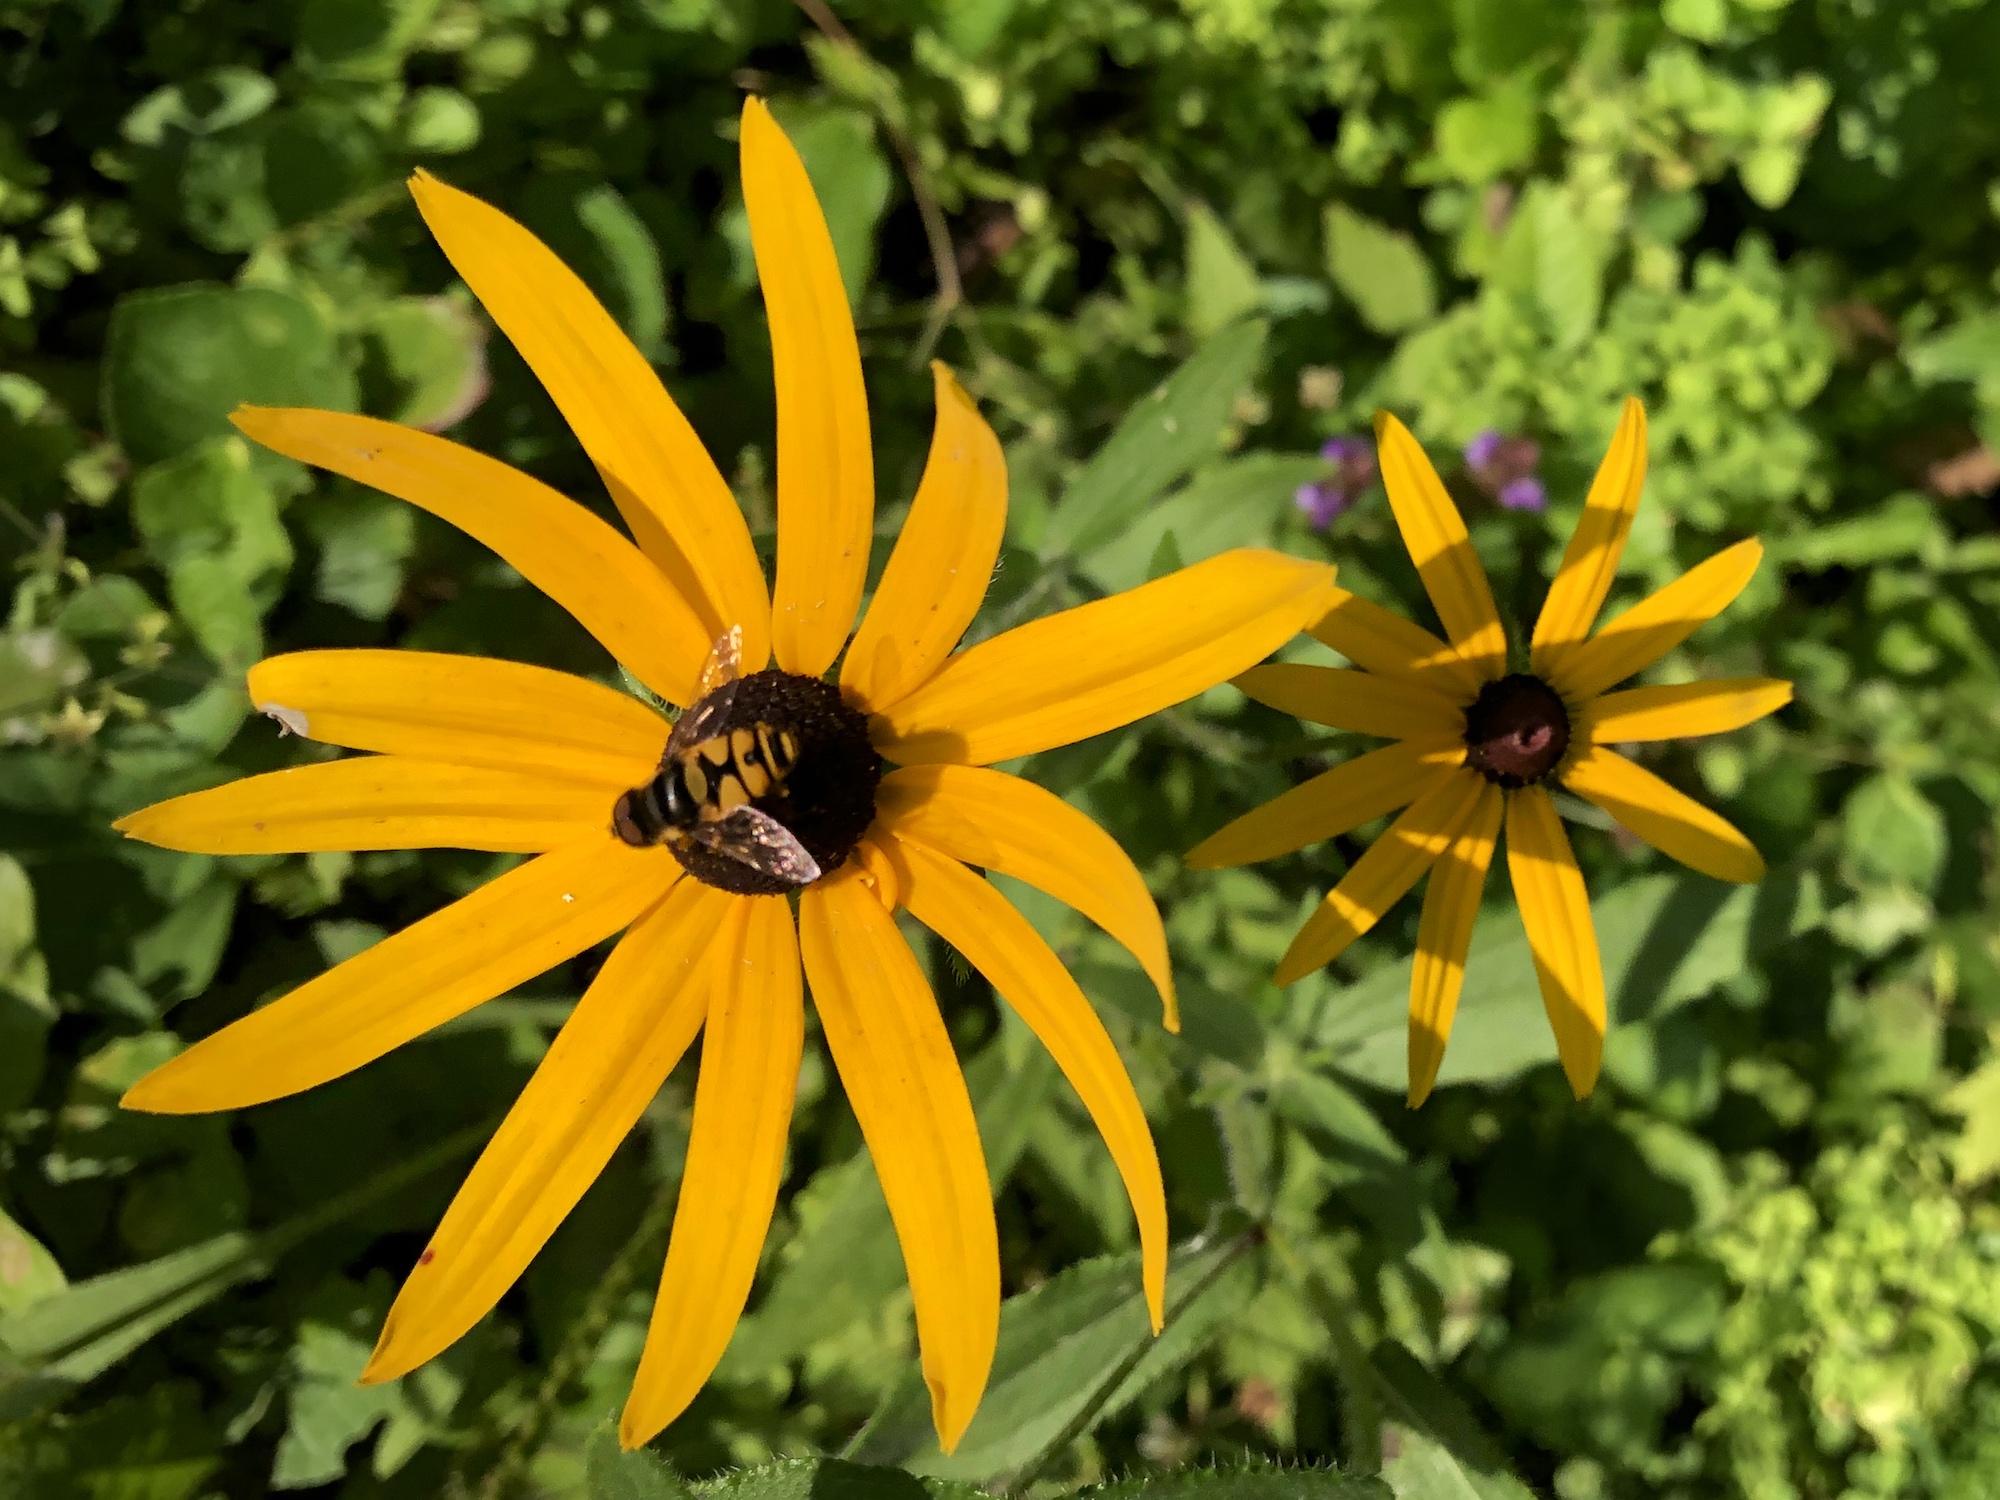 Black-eyed Susan on banks of Marion Dunn Pond in Madison, Wisconsin on July 31, 2020.